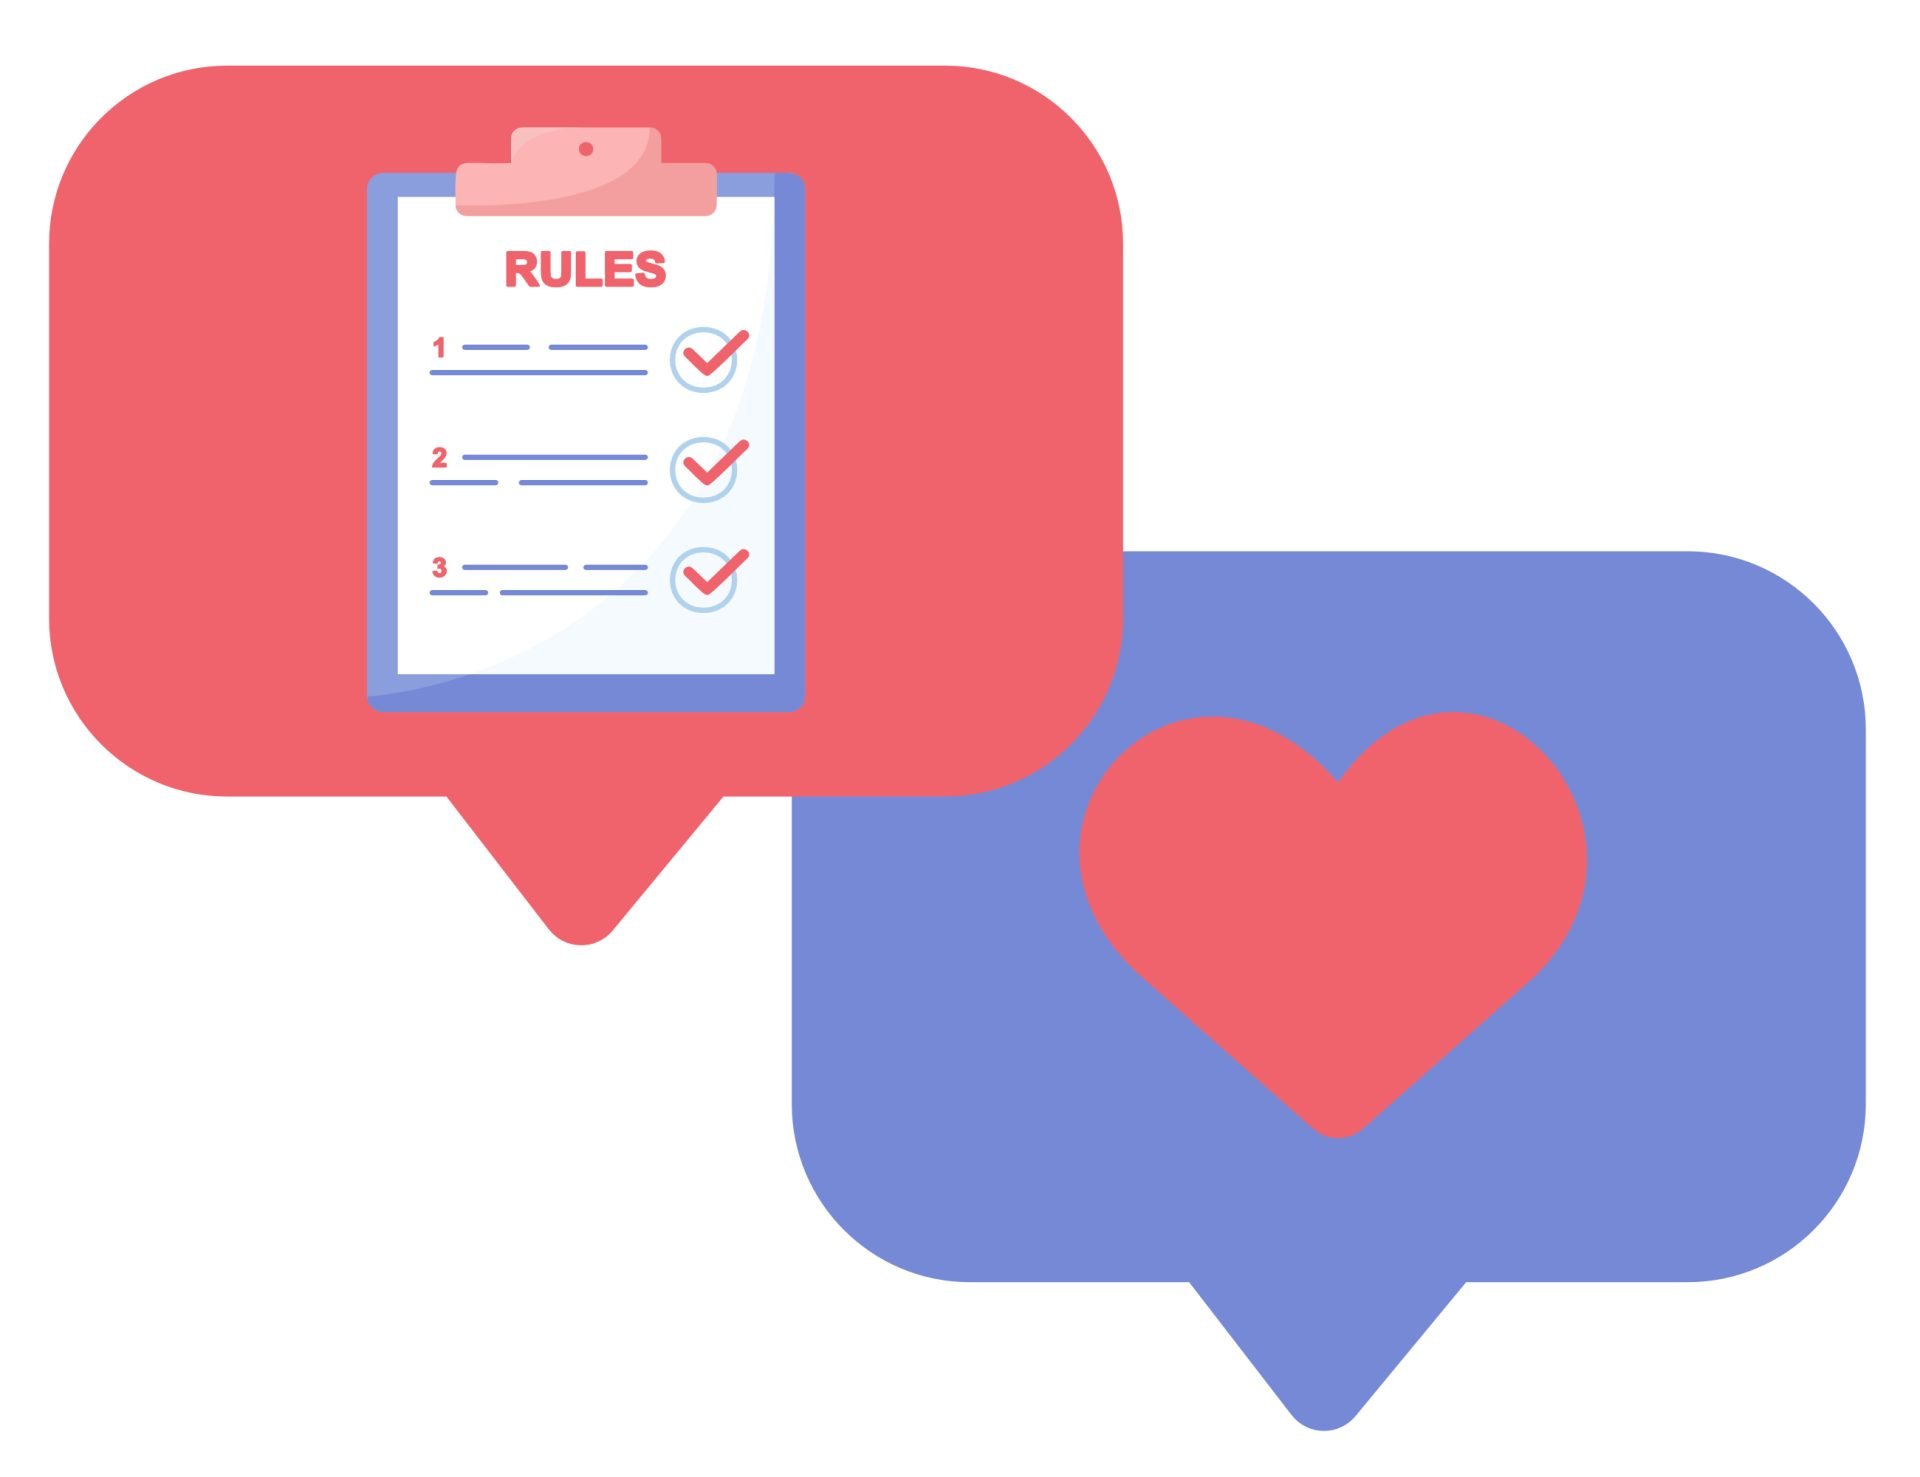 Two speech bubbles, one containing a list of rules, the other containg a heart